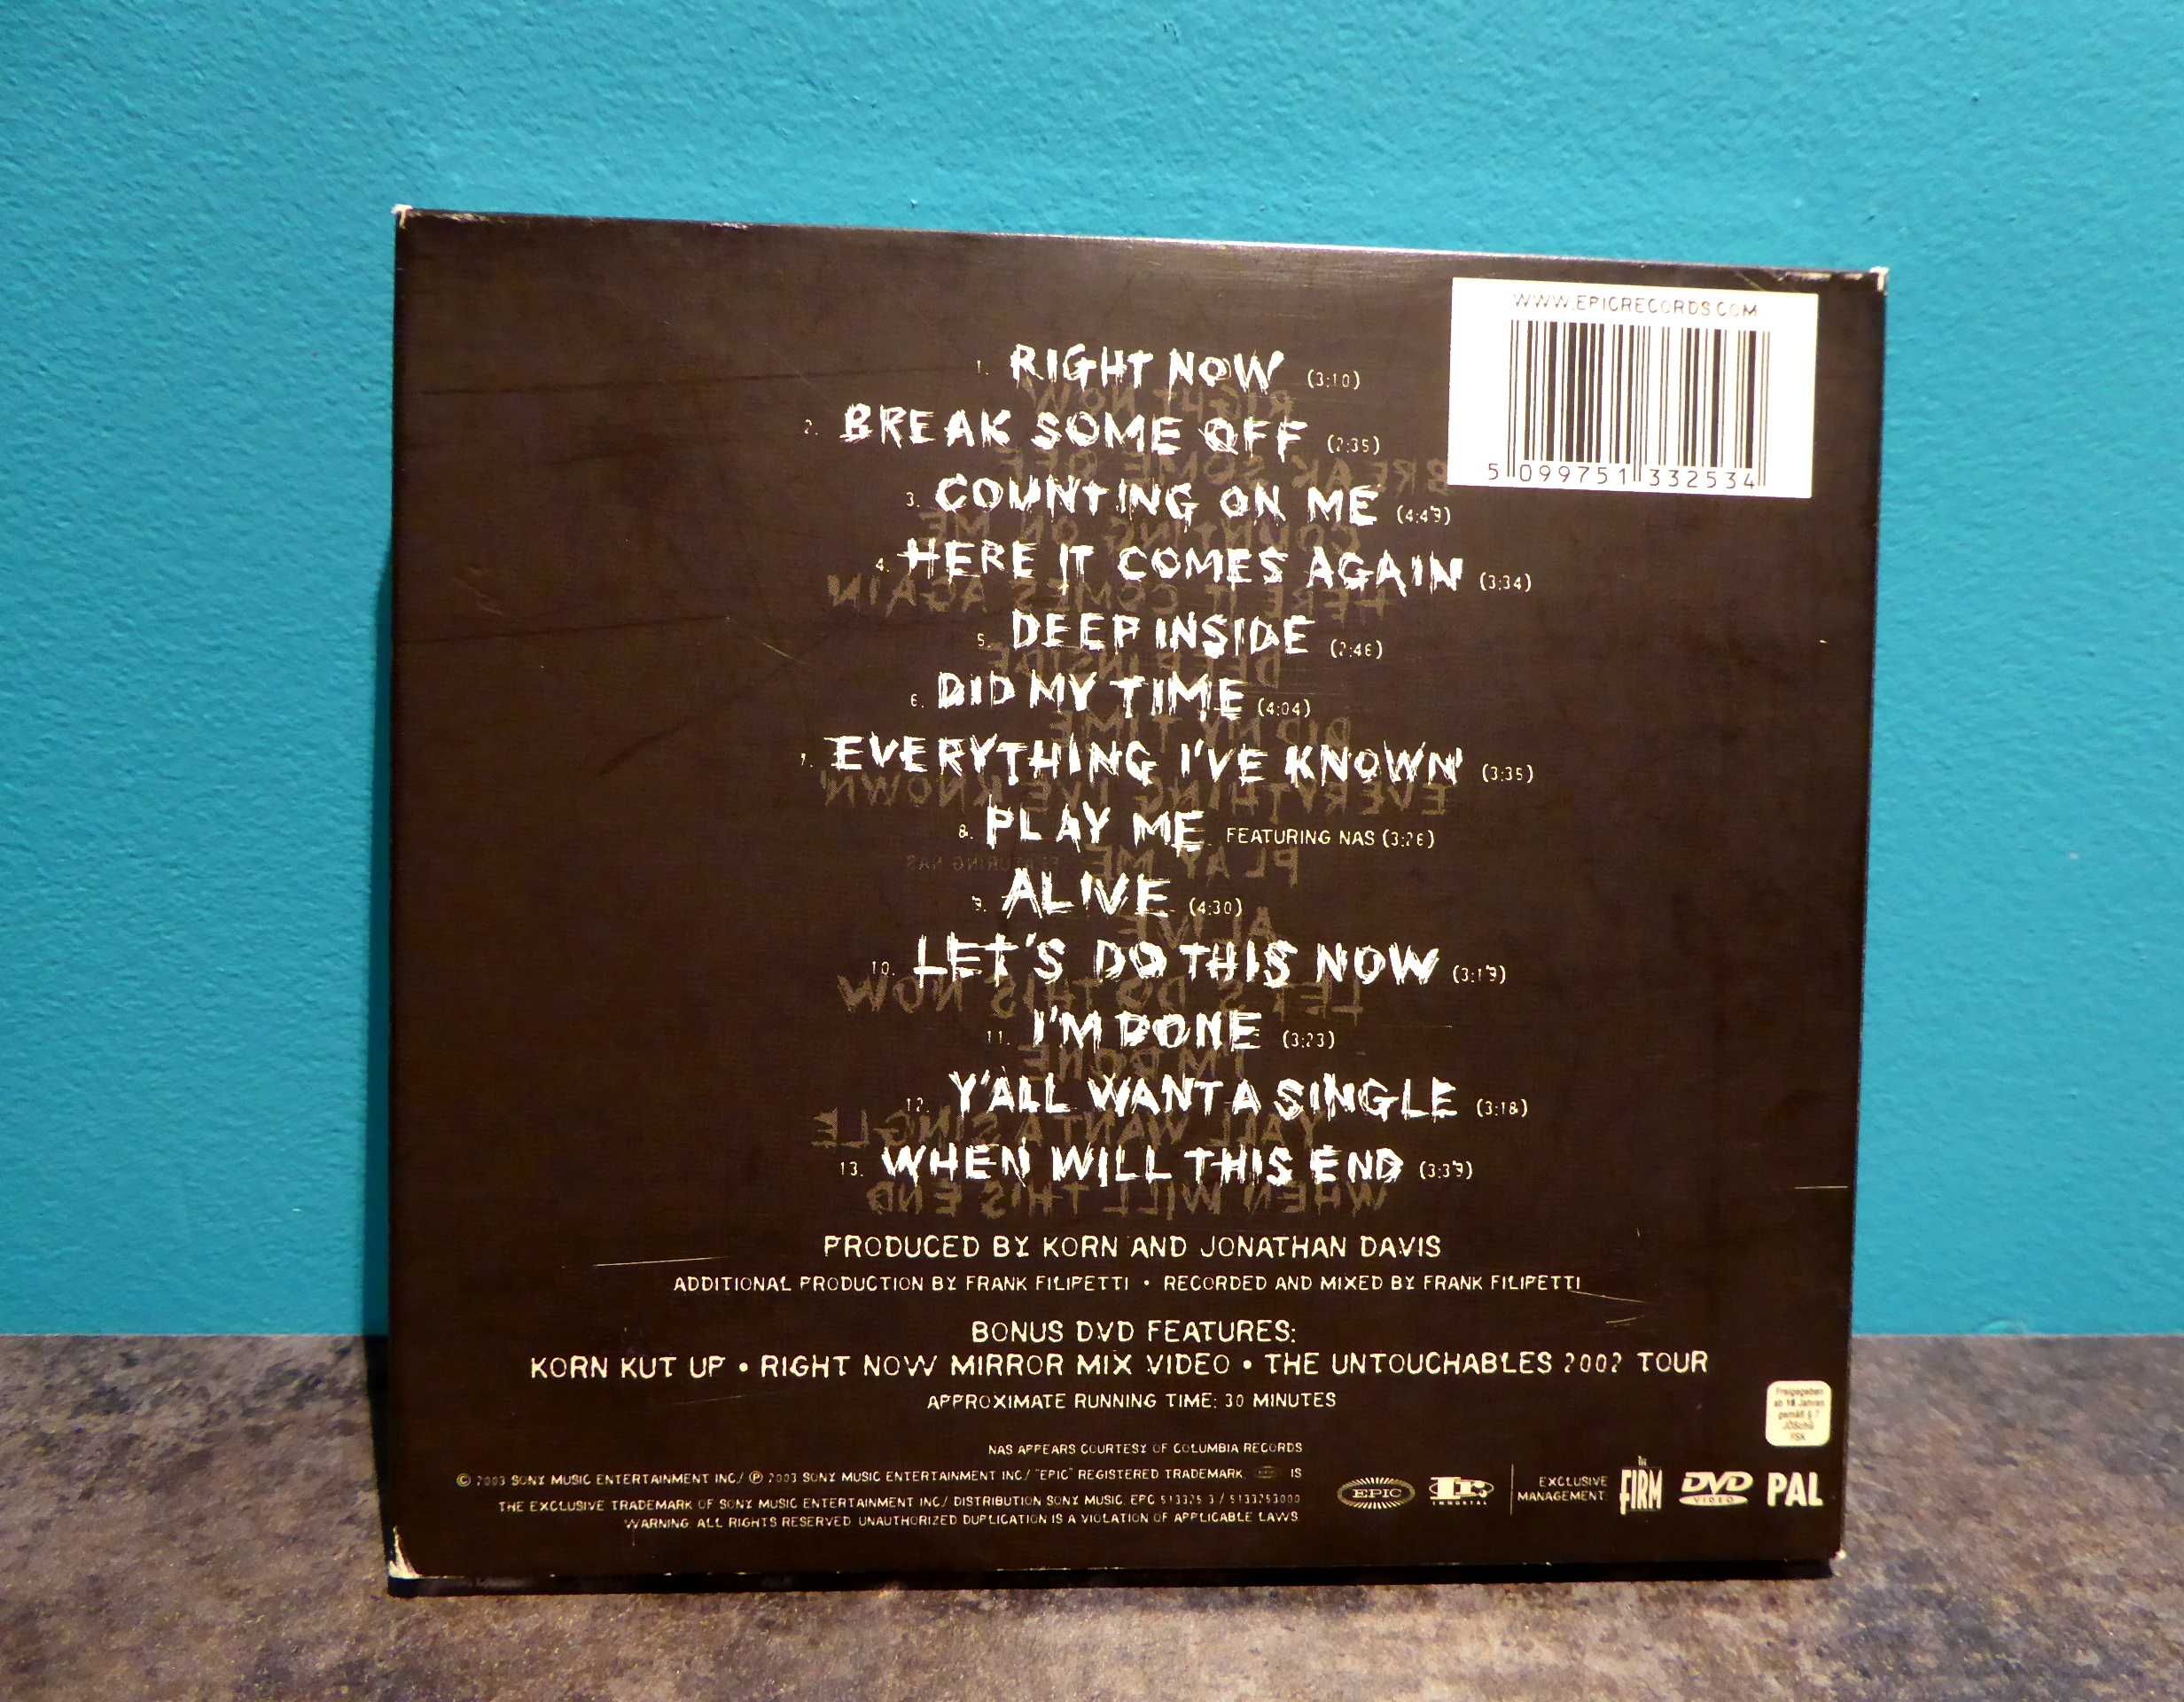 KORN - Take A Look In The Mirror - Special Edition CD/DVD Digipack